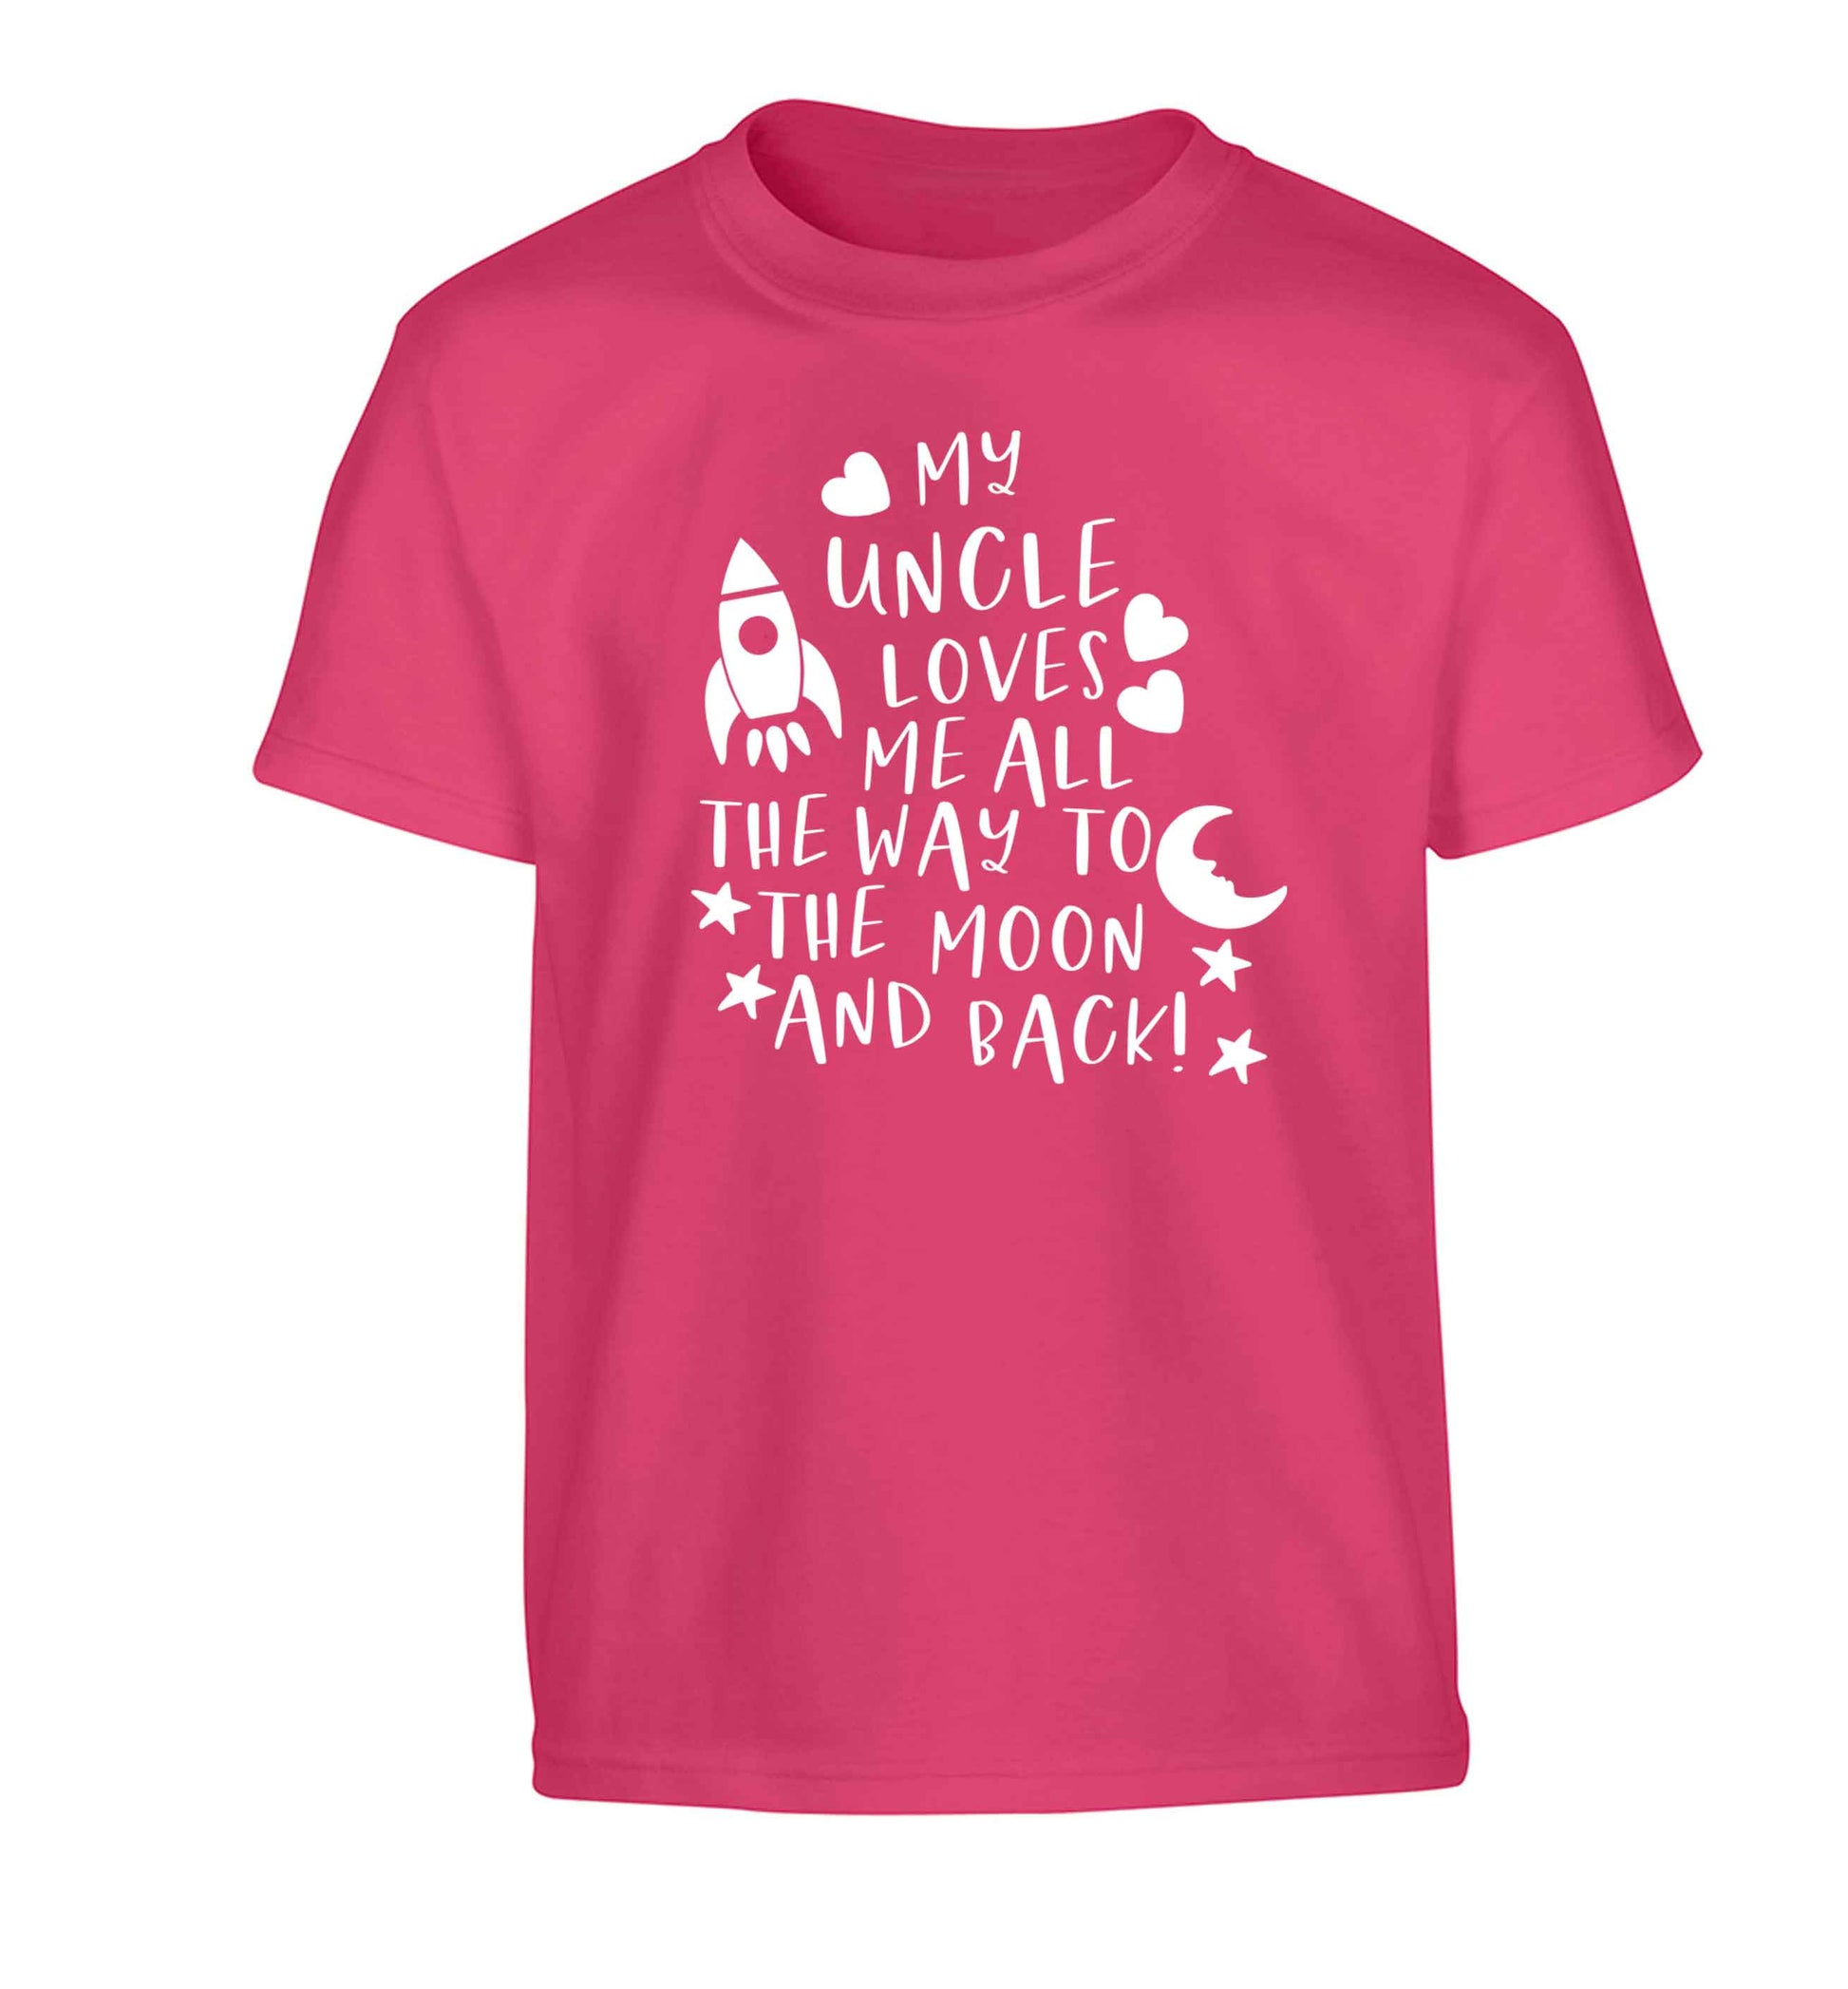 My uncle loves me all the way to the moon and back Children's pink Tshirt 12-13 Years